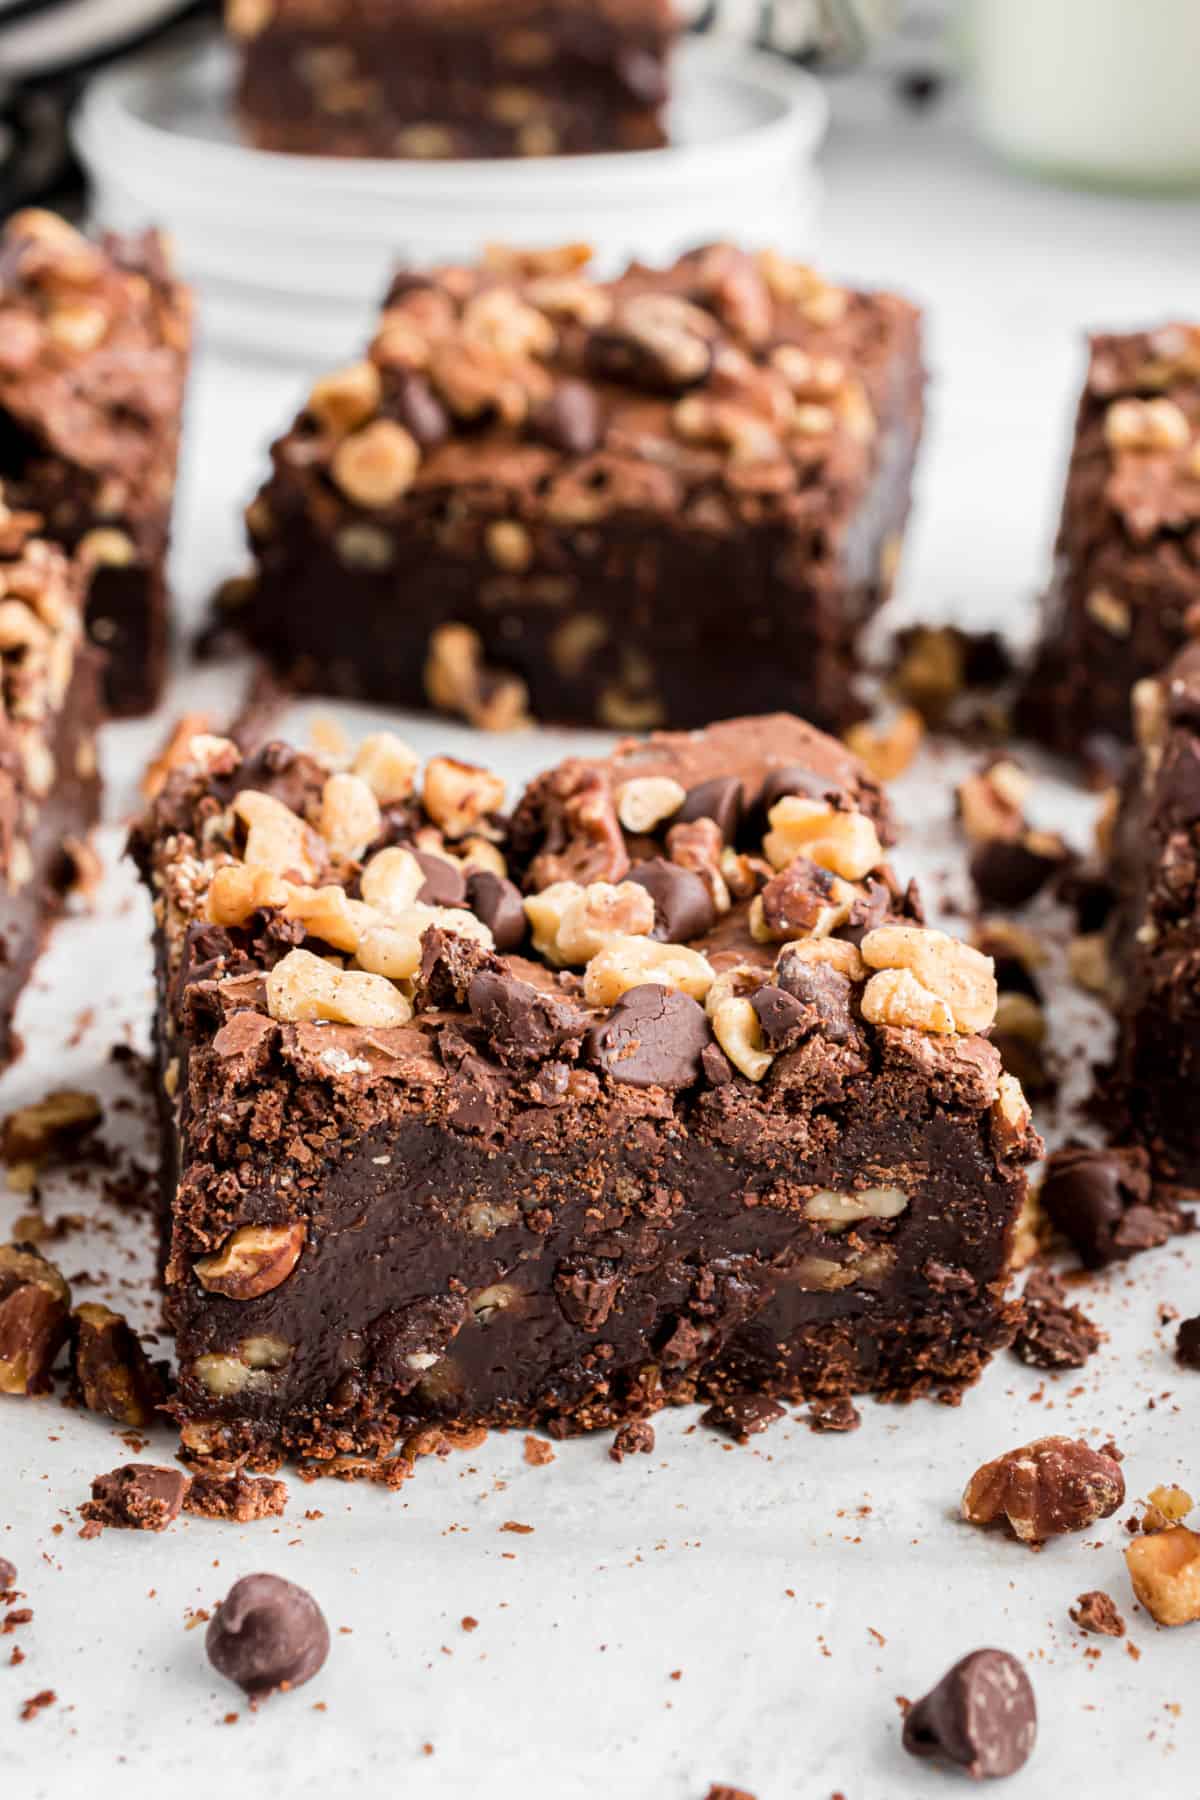 Square of thick, fudgy brownie packed with walnuts on a piece of parchment paper.